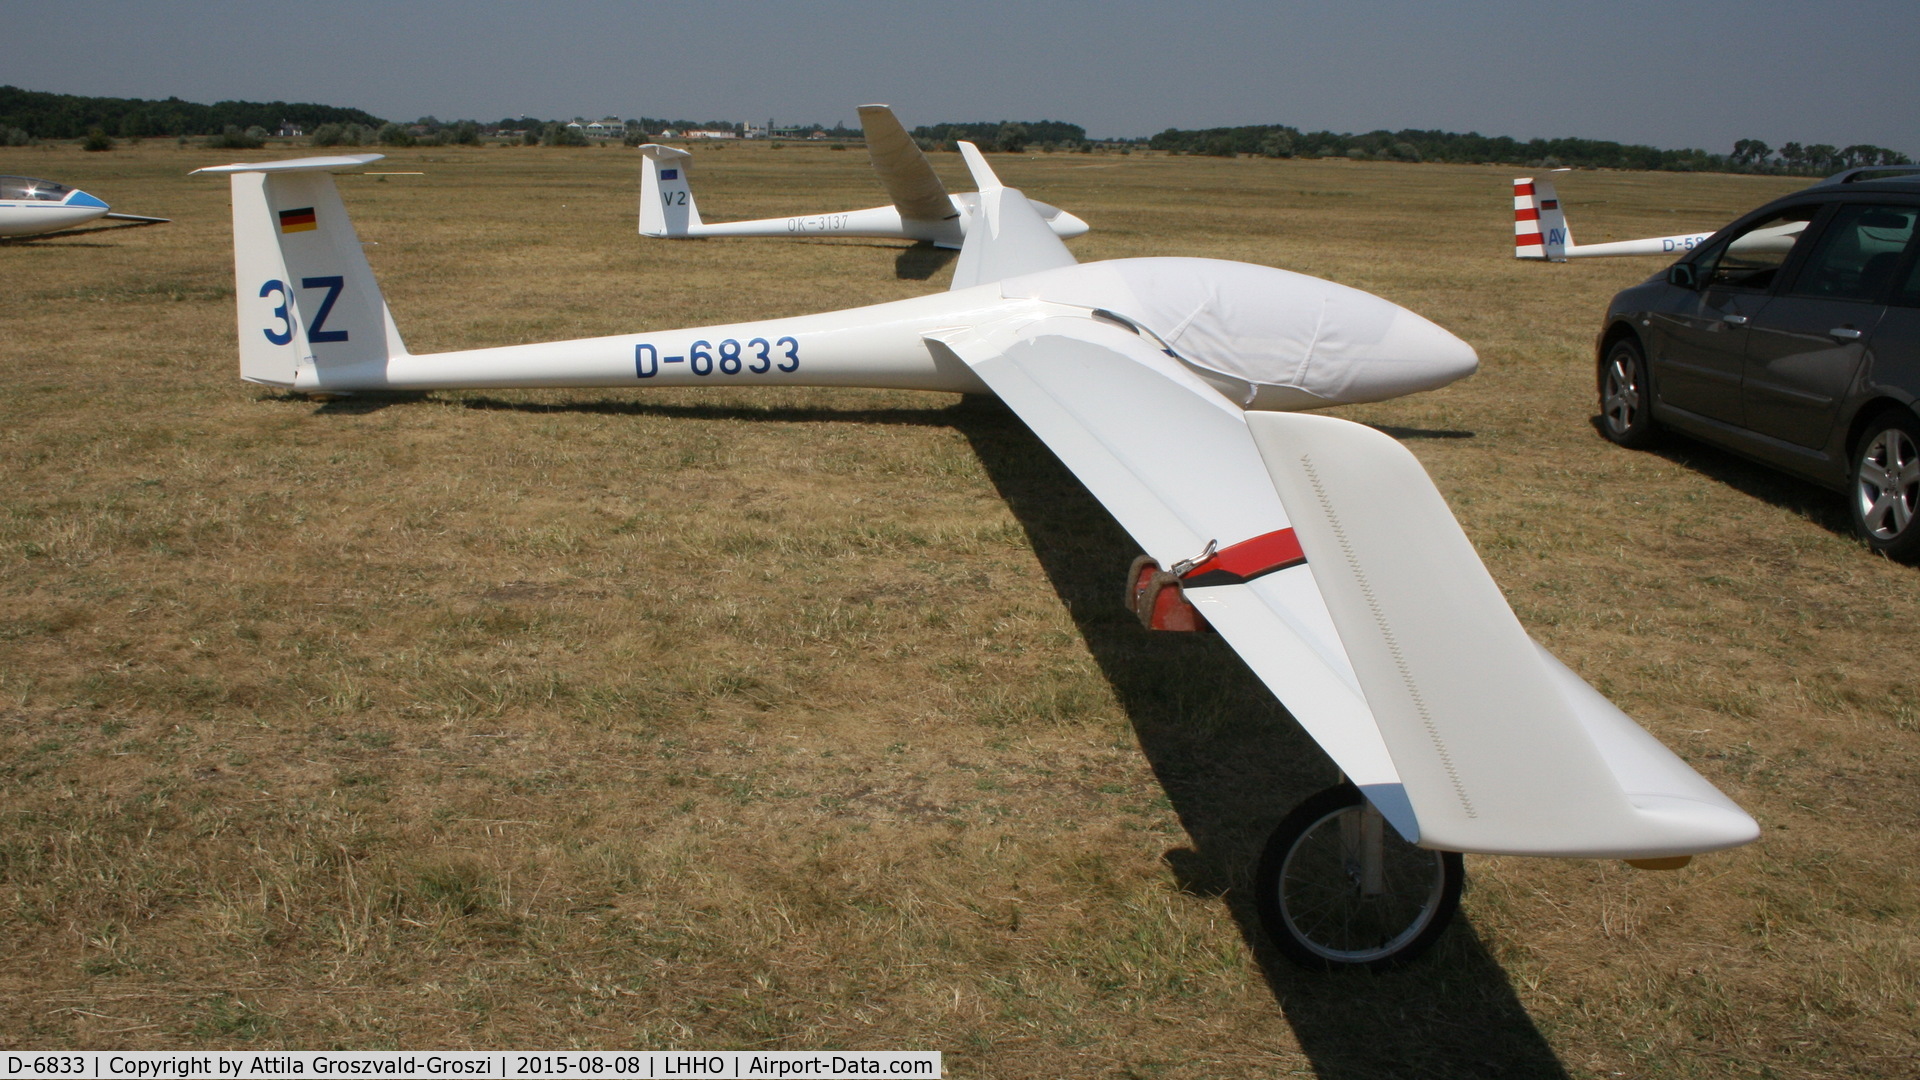 D-6833, 1979 Rolladen-Schneider LS-3a C/N 3338, Hajdúszoboszló Airport, Hungary - 60. Hungary Gliding National Championship and third Civis Thermal Cup, 2015